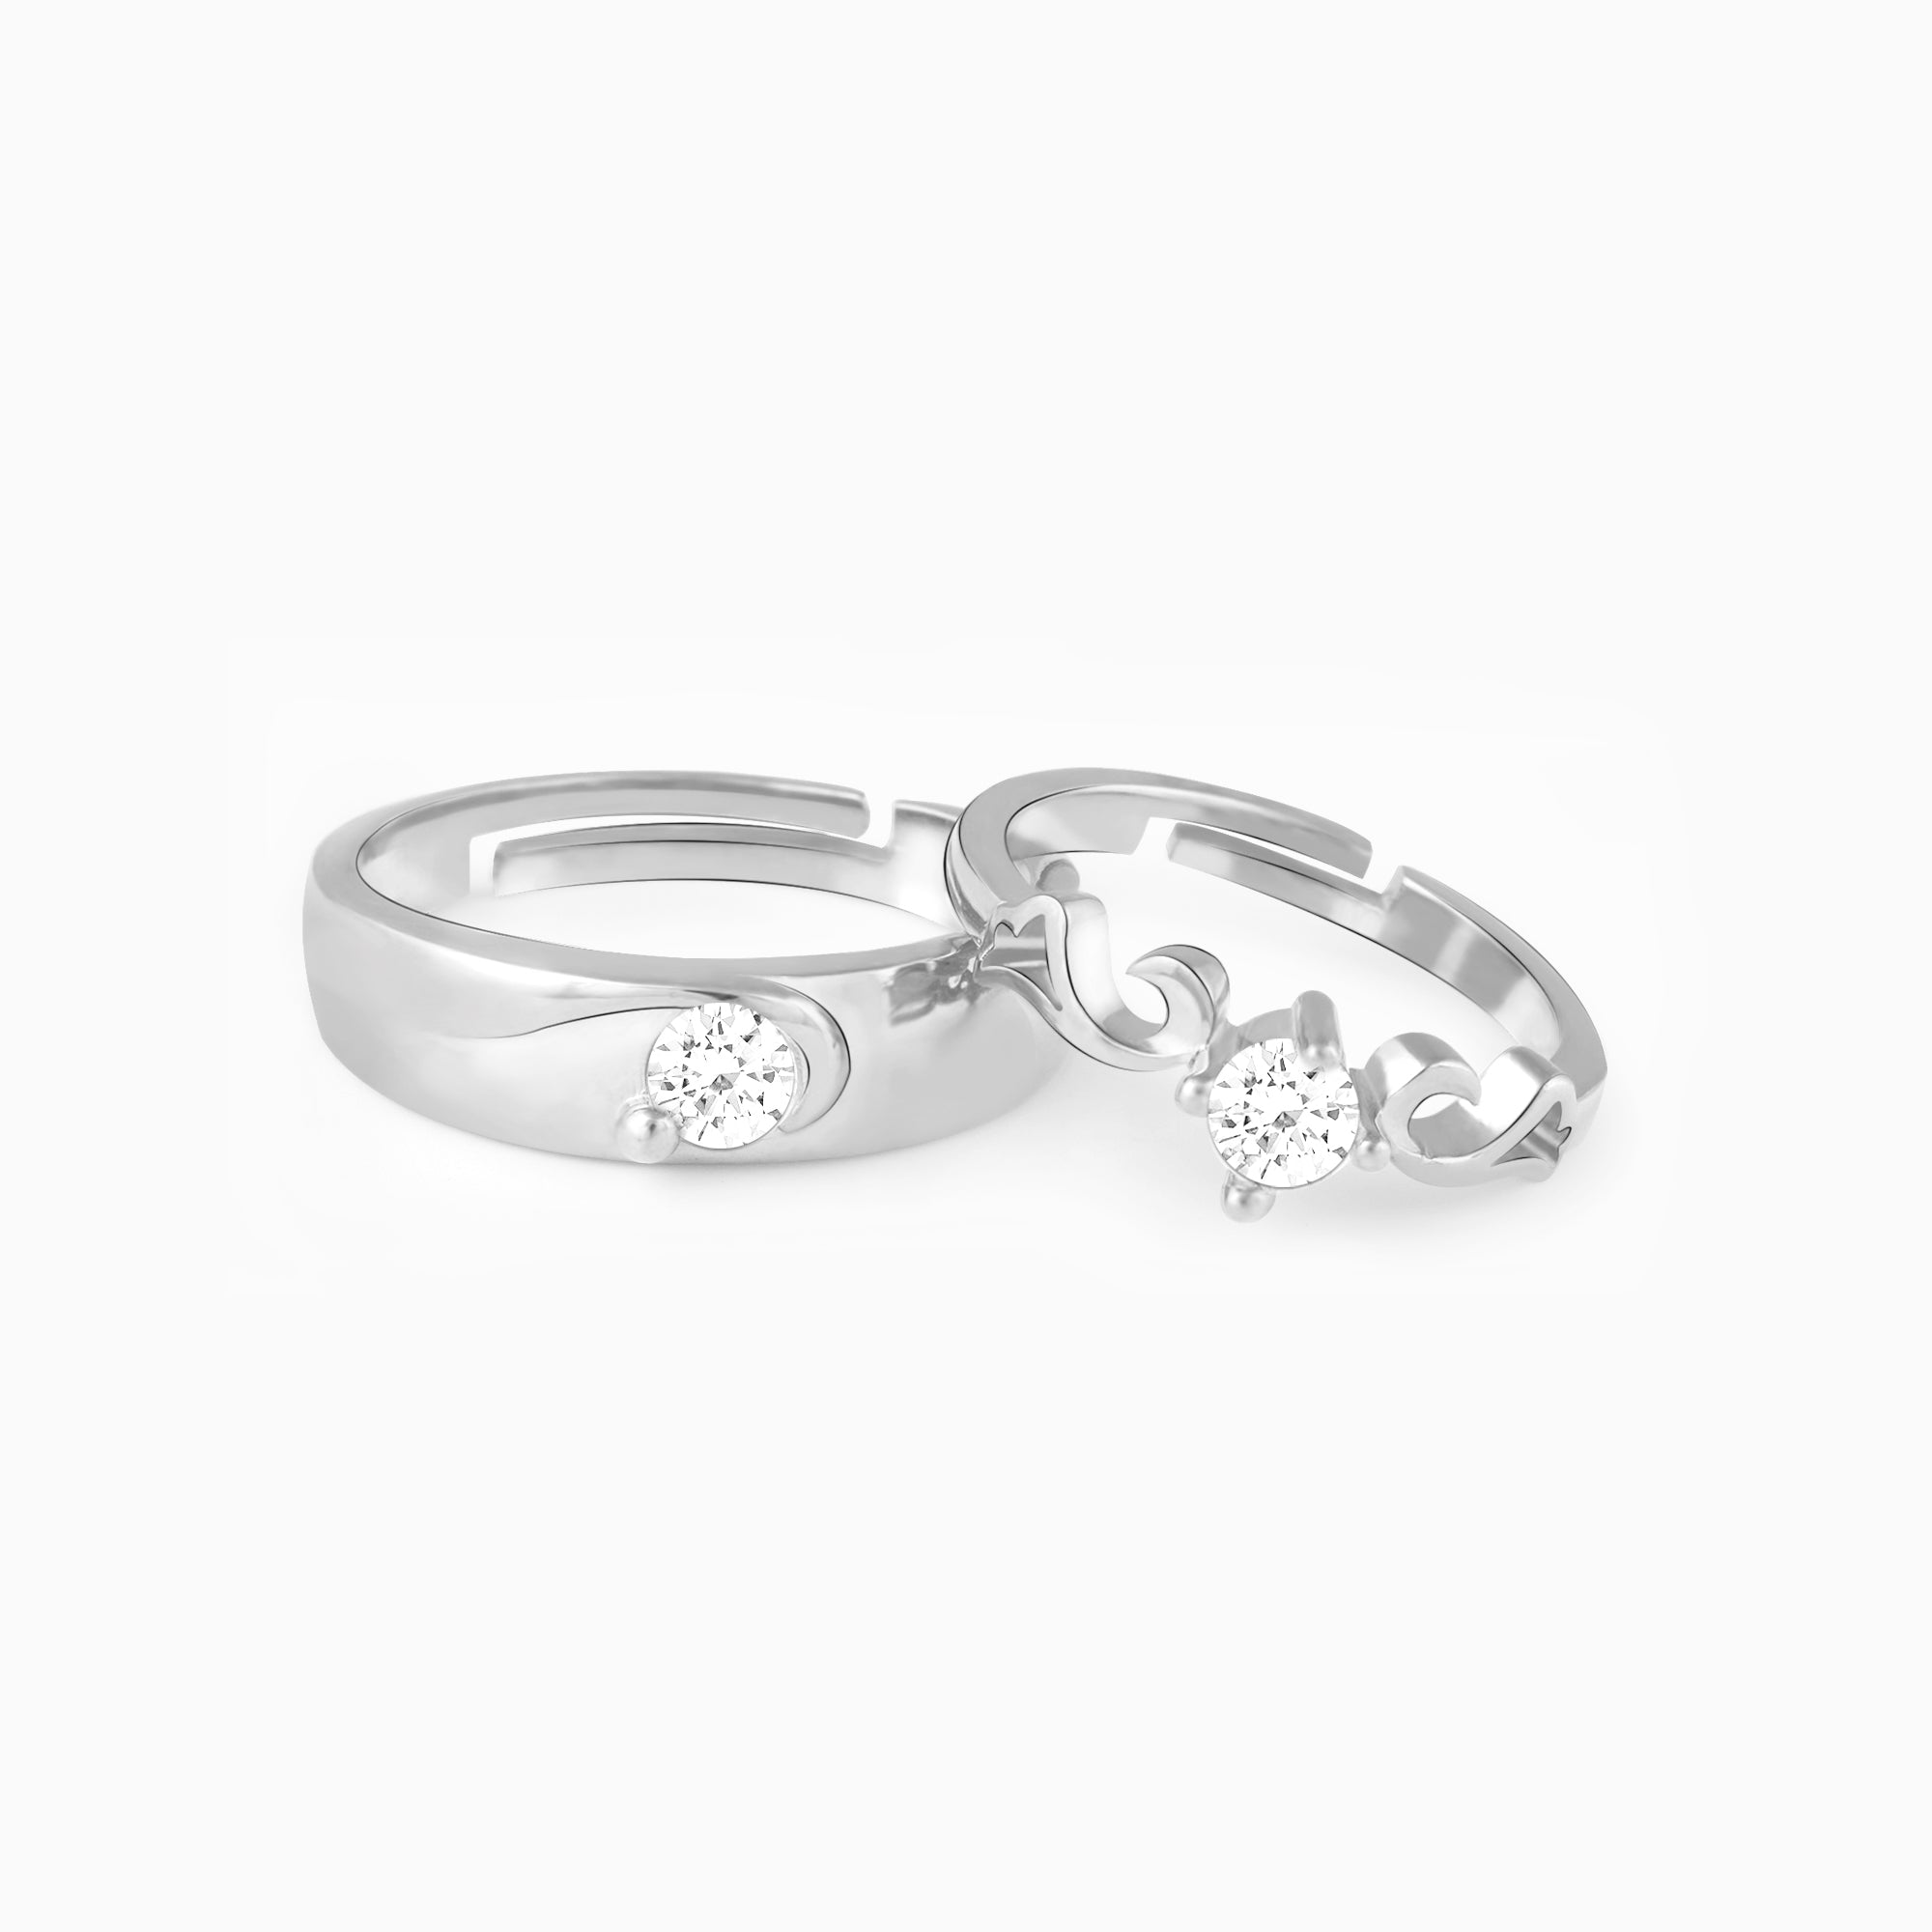 Glitzy Love CZ 925 Sterling Silver Ring, Thin Band with FREE Gift Box –  North Arrow Shop